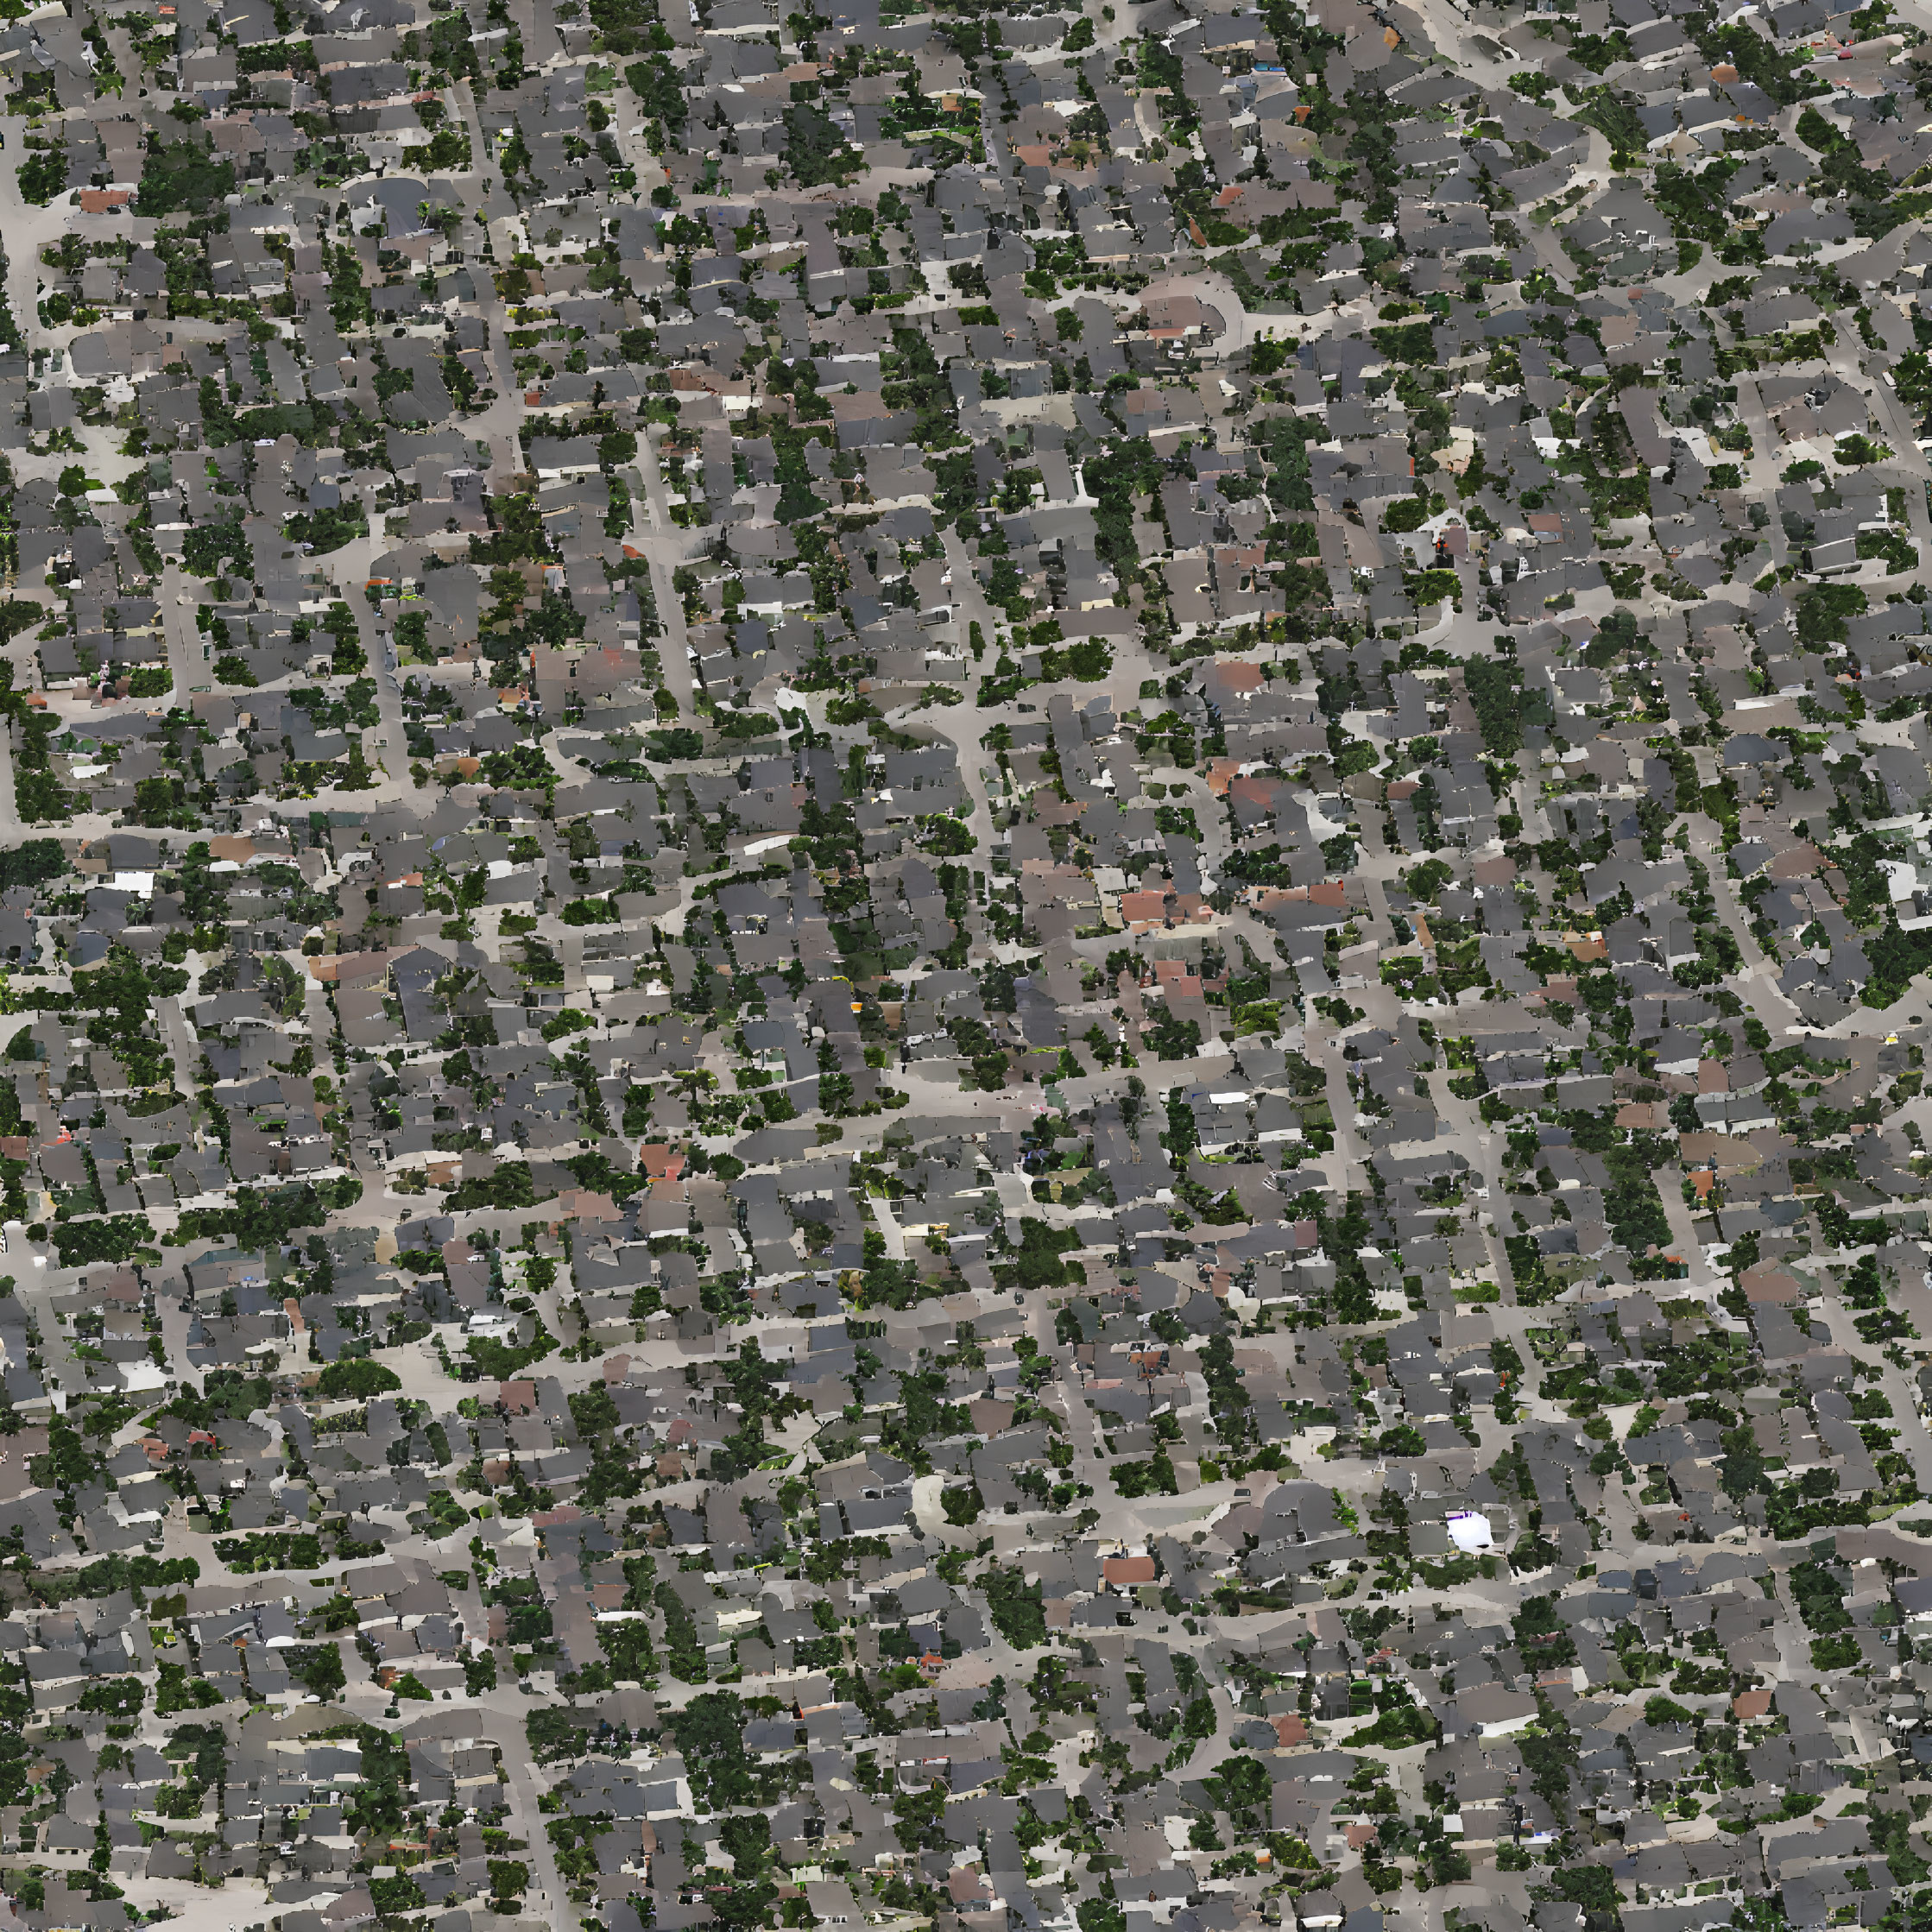 Dense Suburban Area with Houses, Trees, and Grid Streets